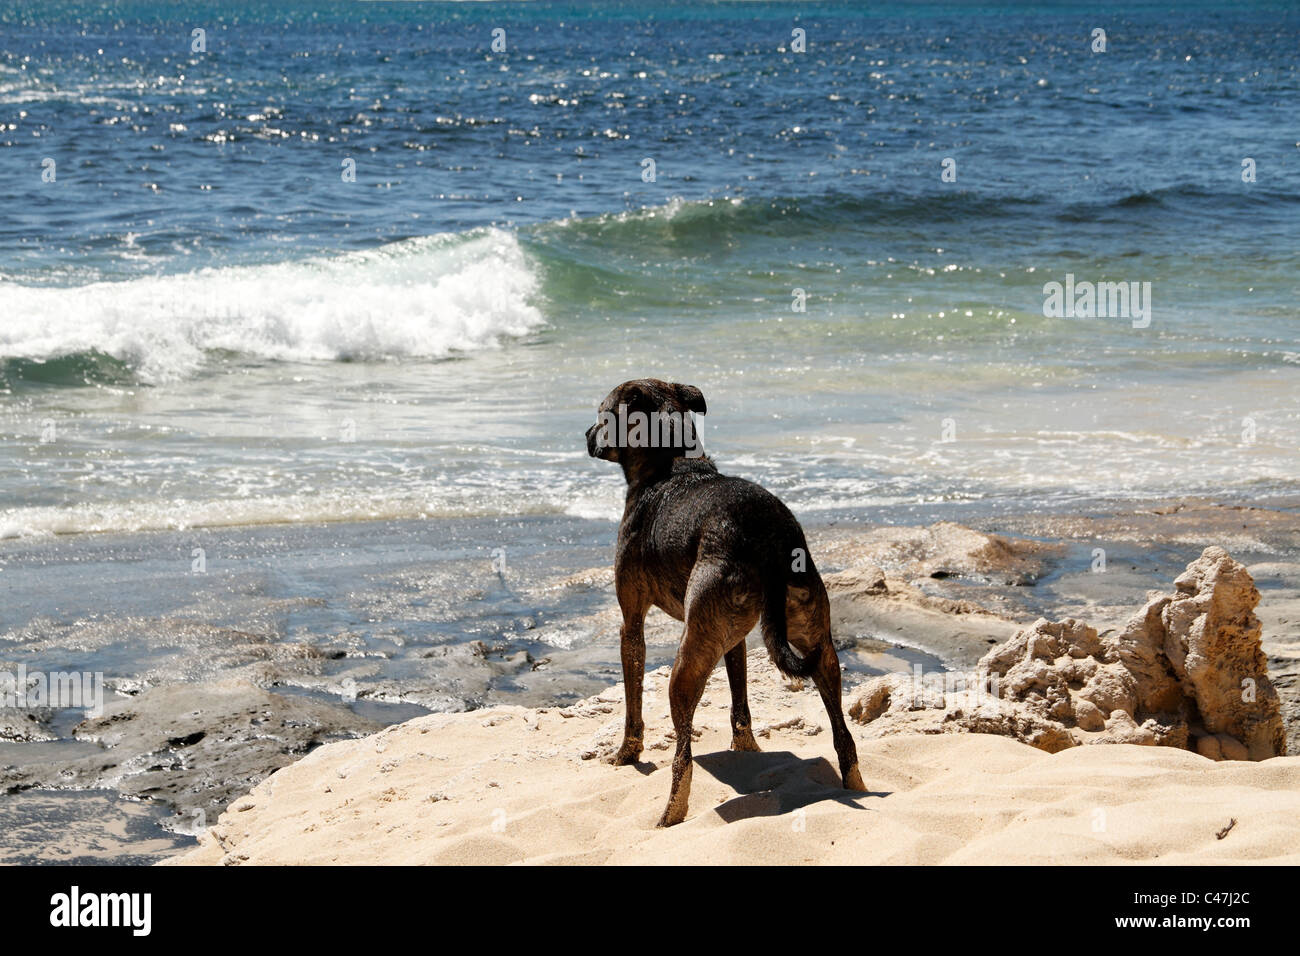 Dog on beach watching the ocean waves, Stock Photo